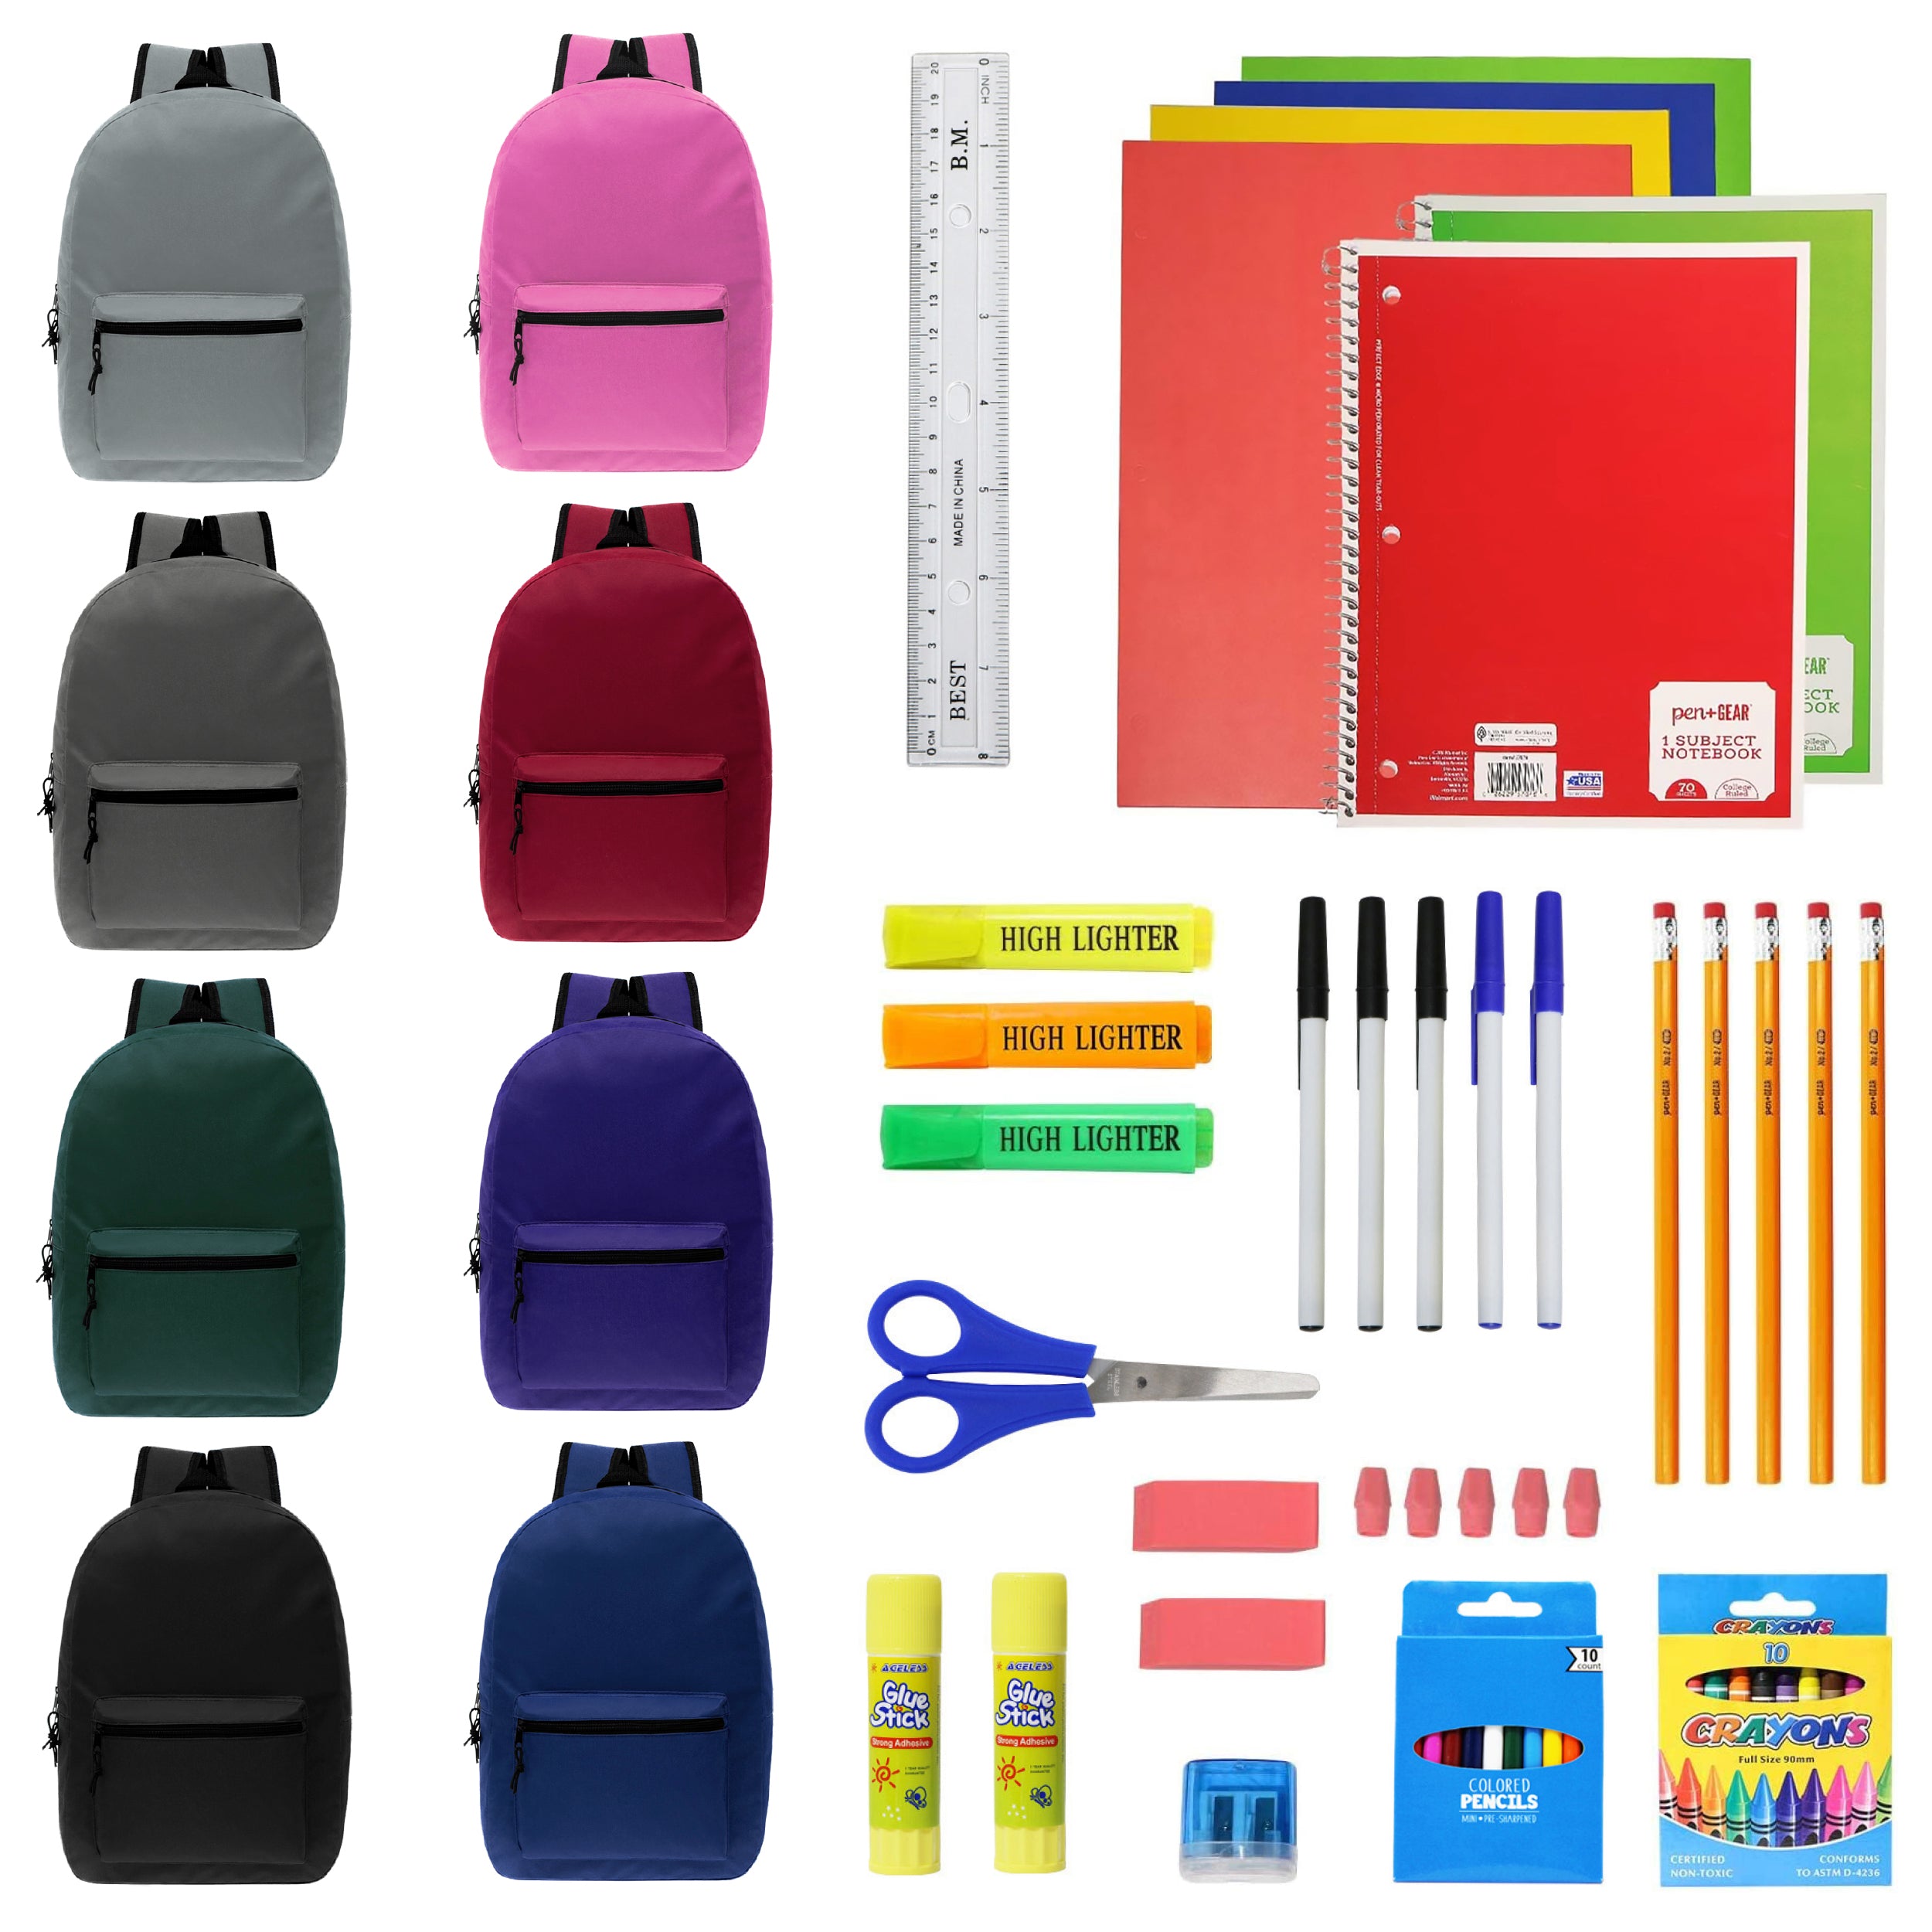 15 Inch Wholesale Backpacks in Assorted Colors with School Supply Kits Bulk - Kit of 12